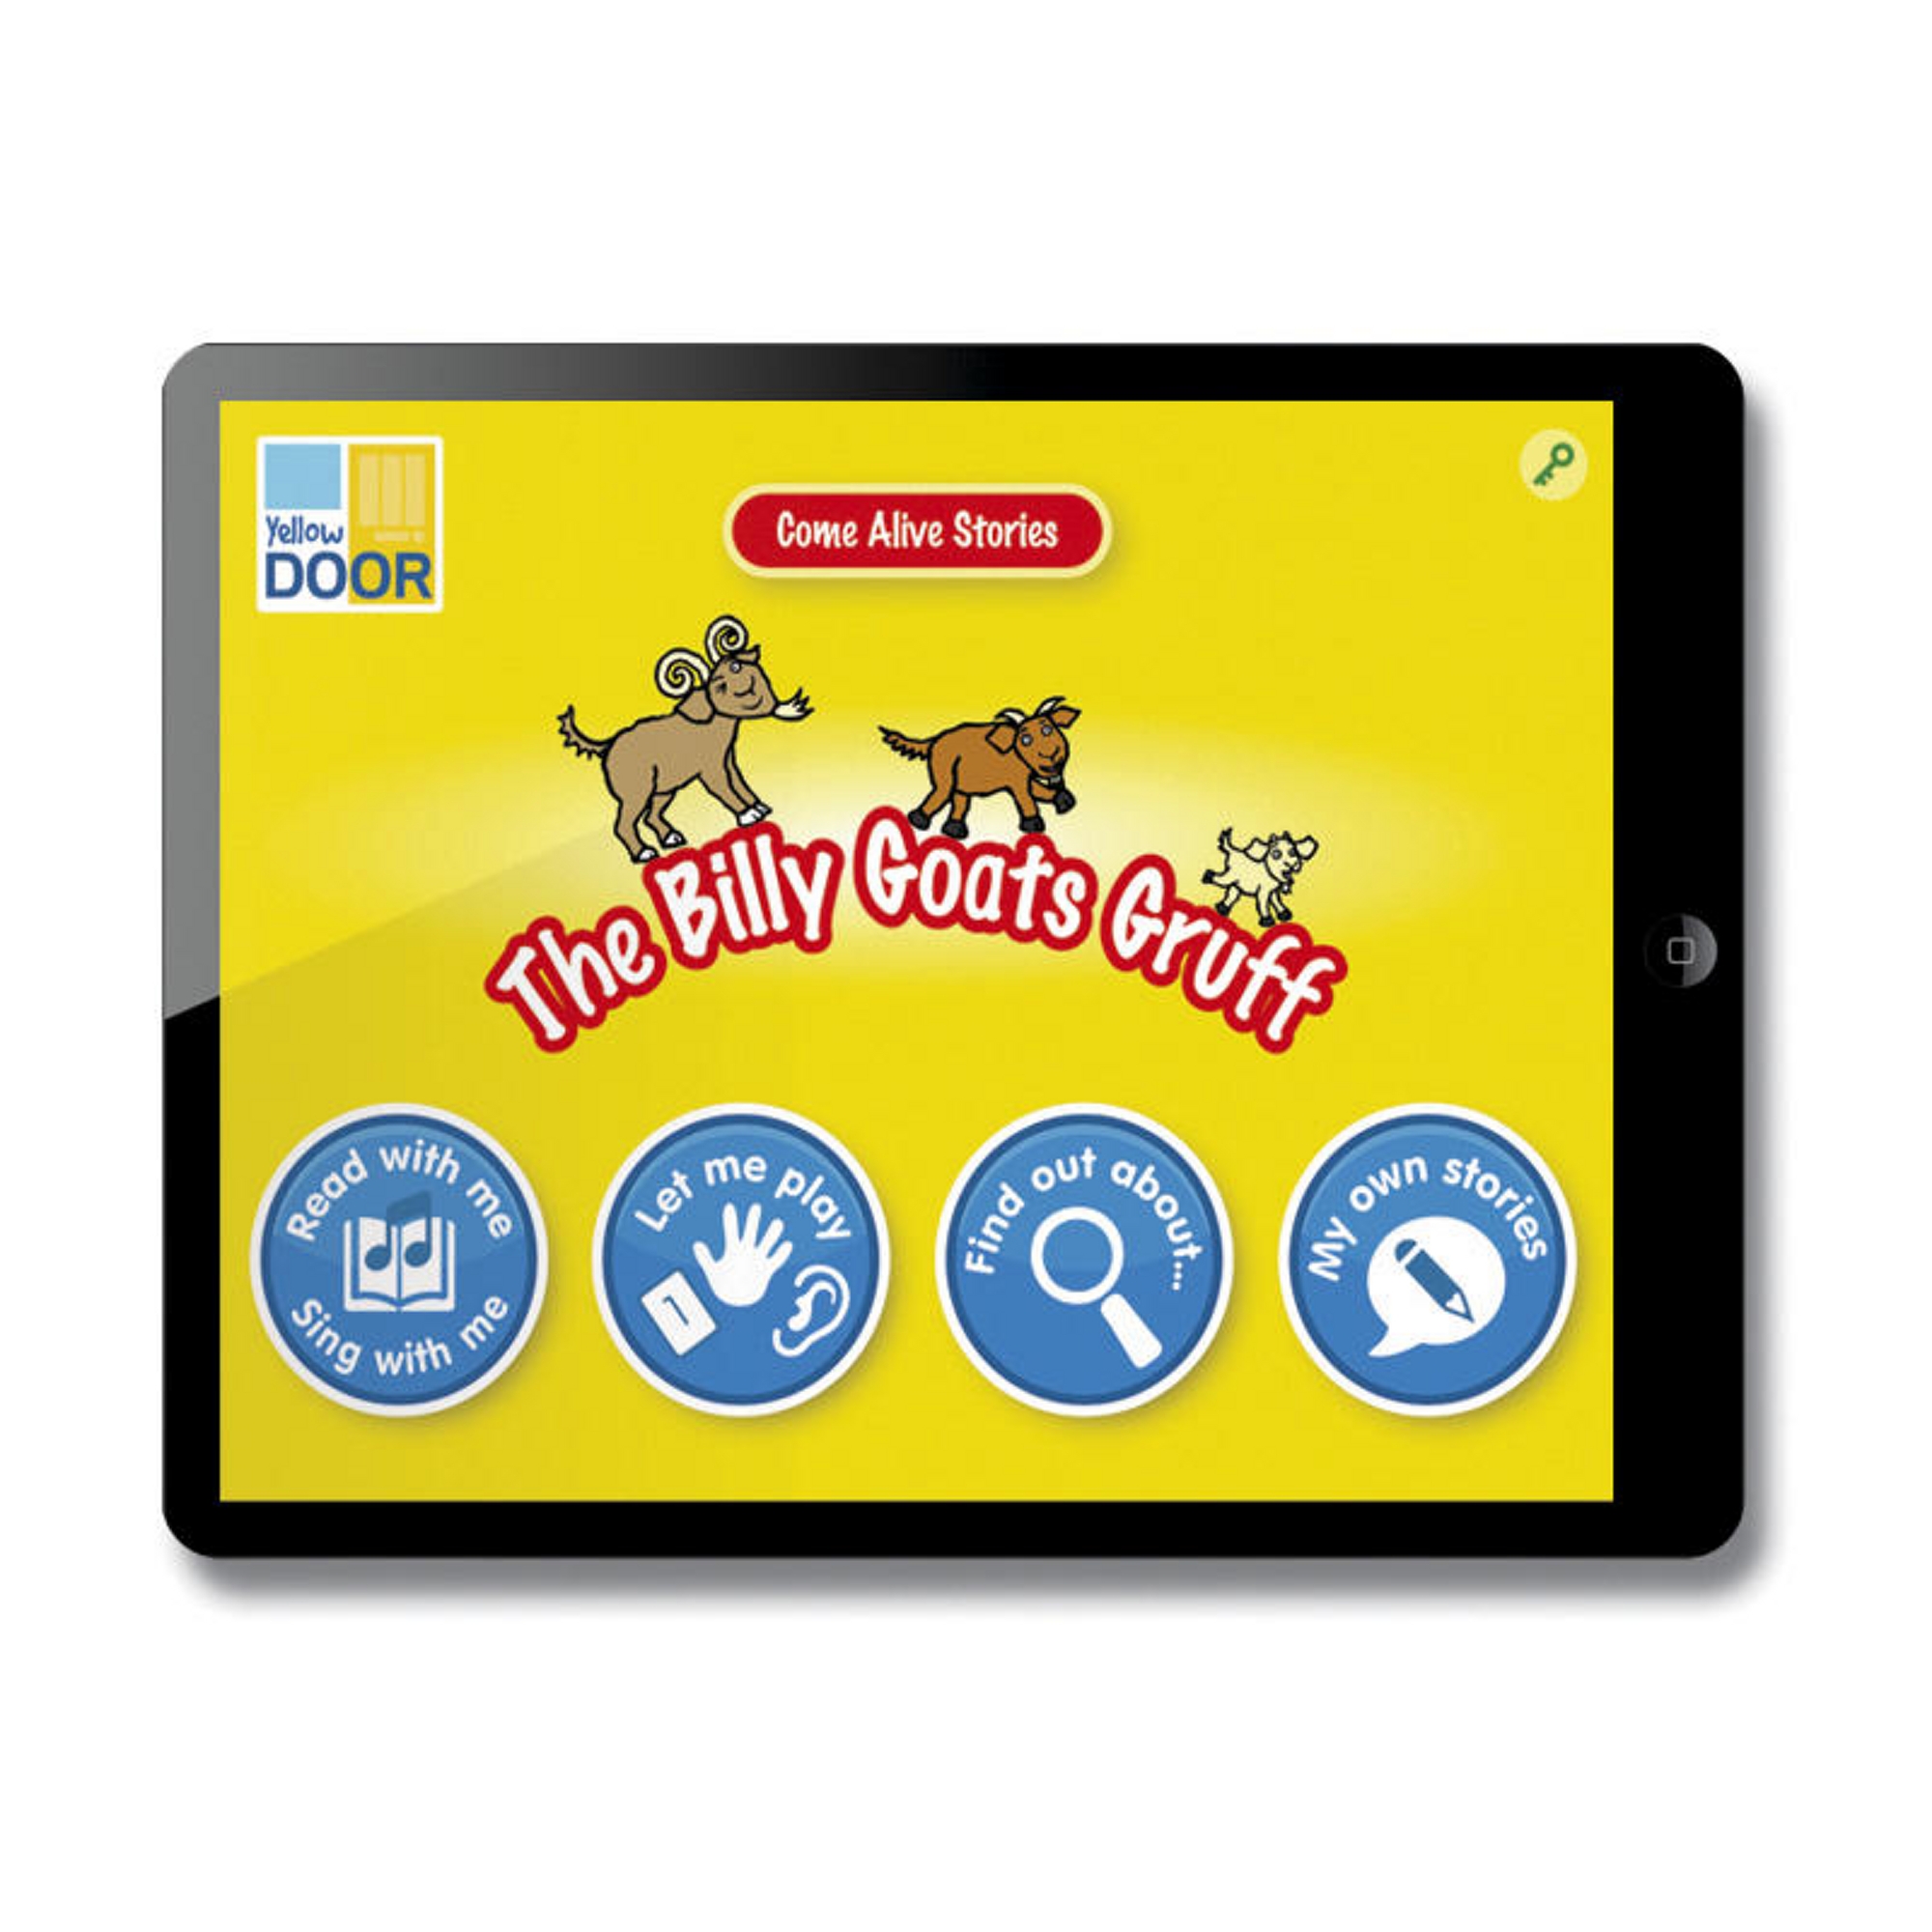 The Billy Goats Gruff App - 6 Users